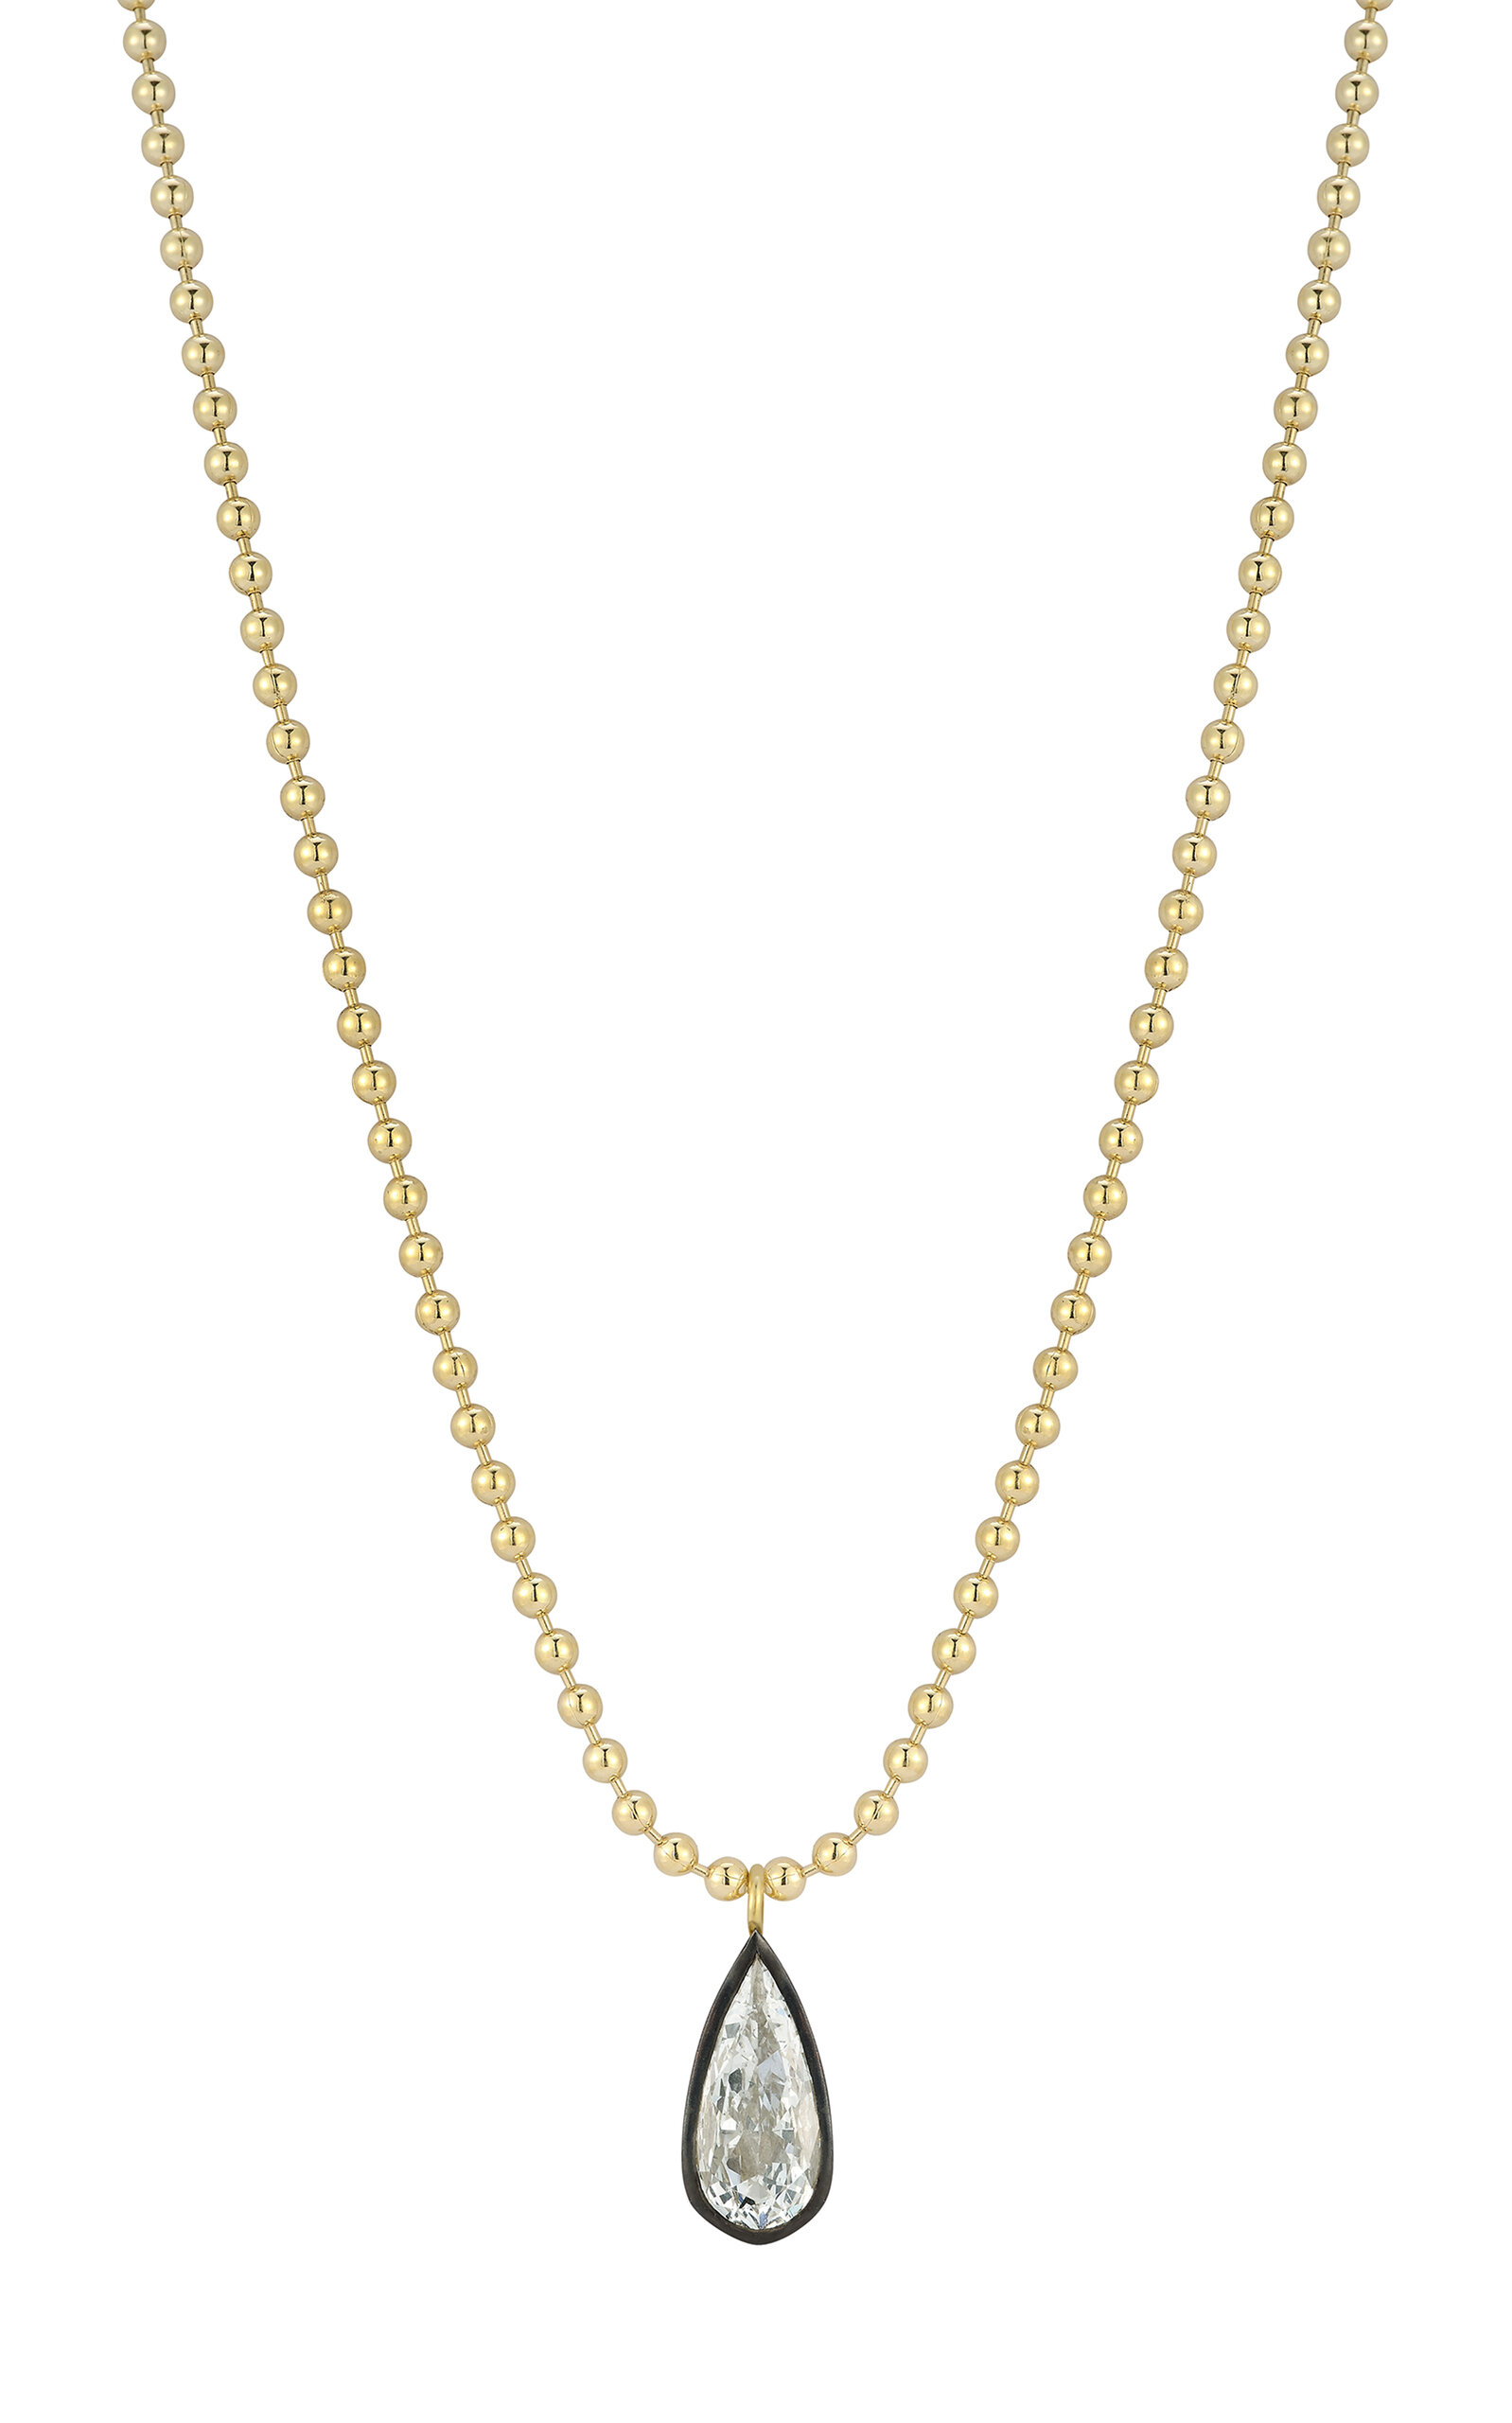 18k Yellow Gold Connexion Elongated Pear Necklace